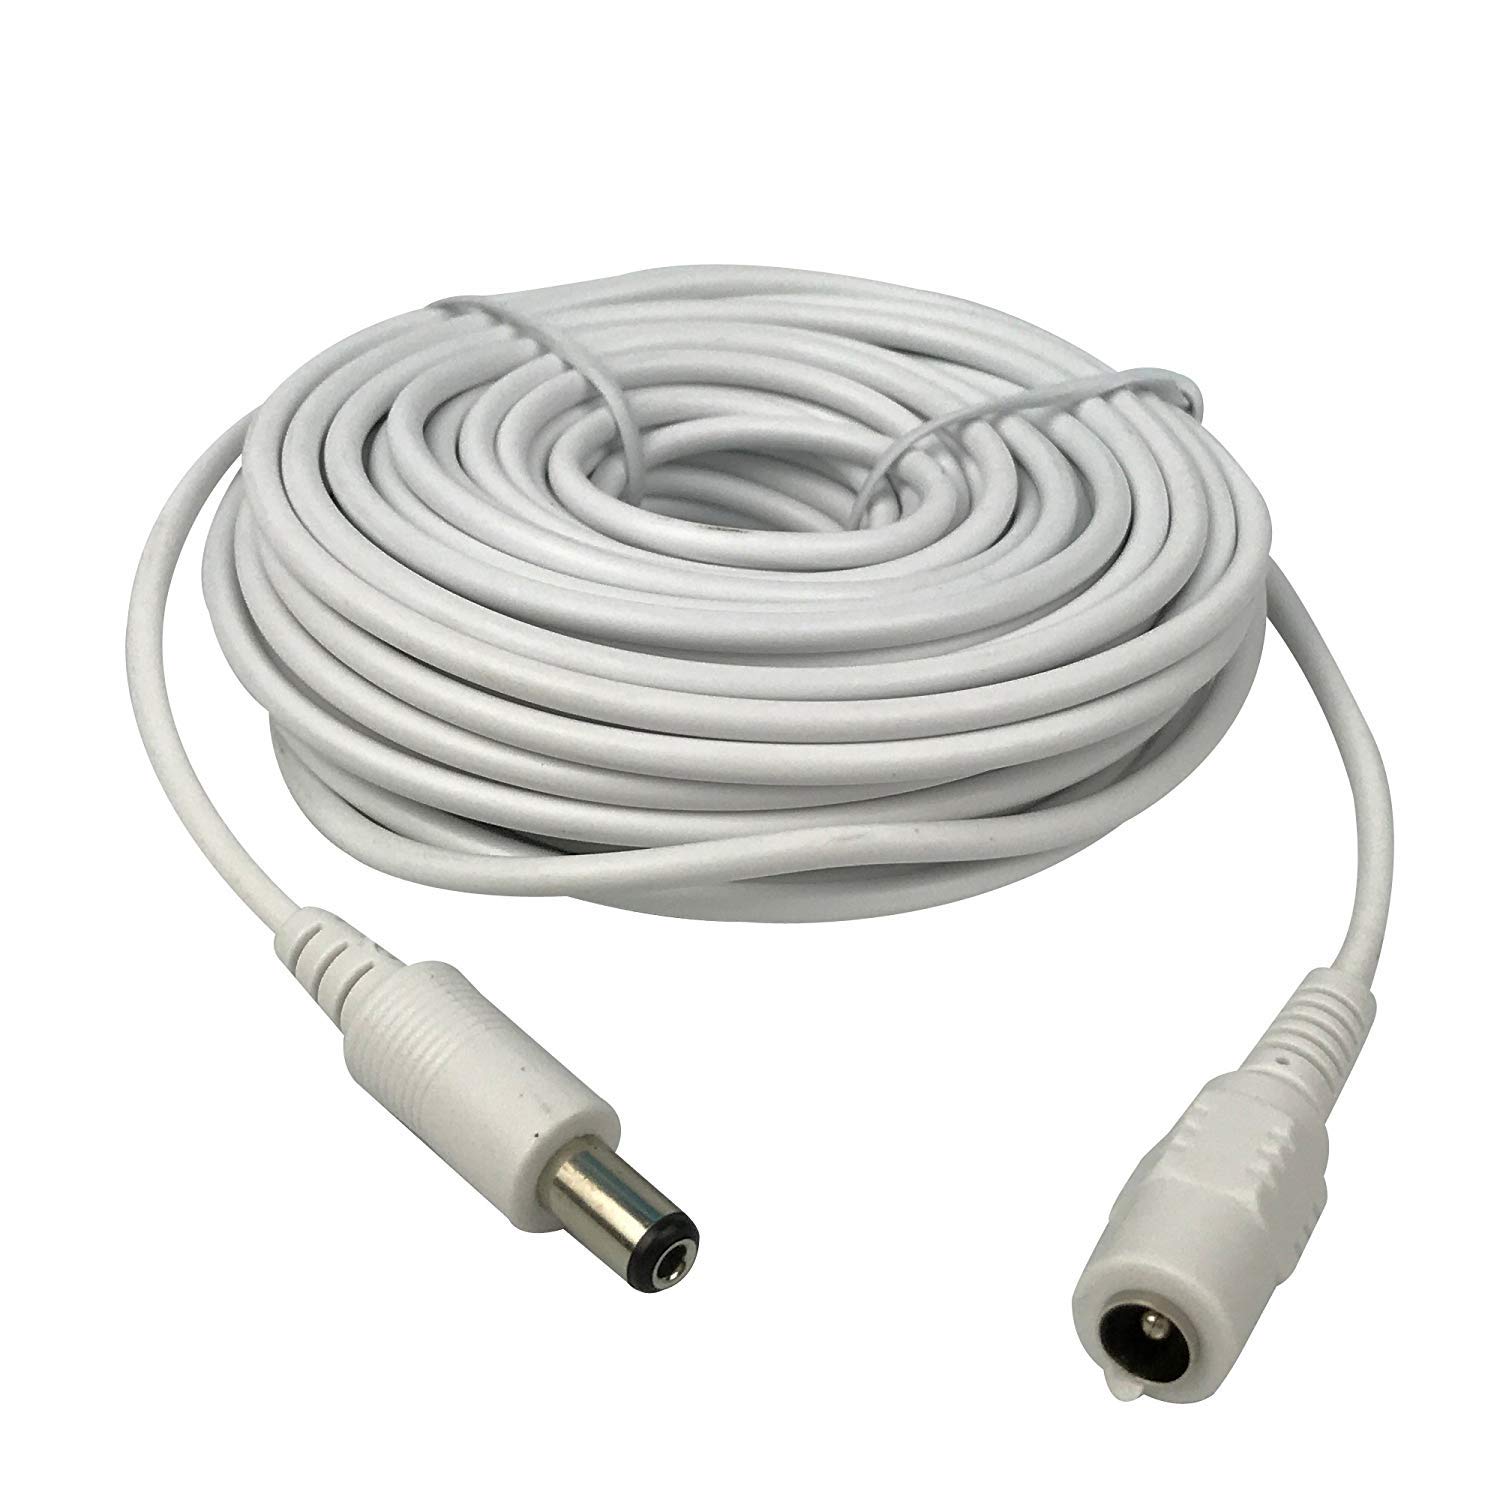 Book Cover Vanxse CCTV Dc 12v Power Extension Cable 10m(30ft) 2.1x5.5mm for CCTV Security Cameras IP Camera Dvr Standalone in White Color-WPC10M